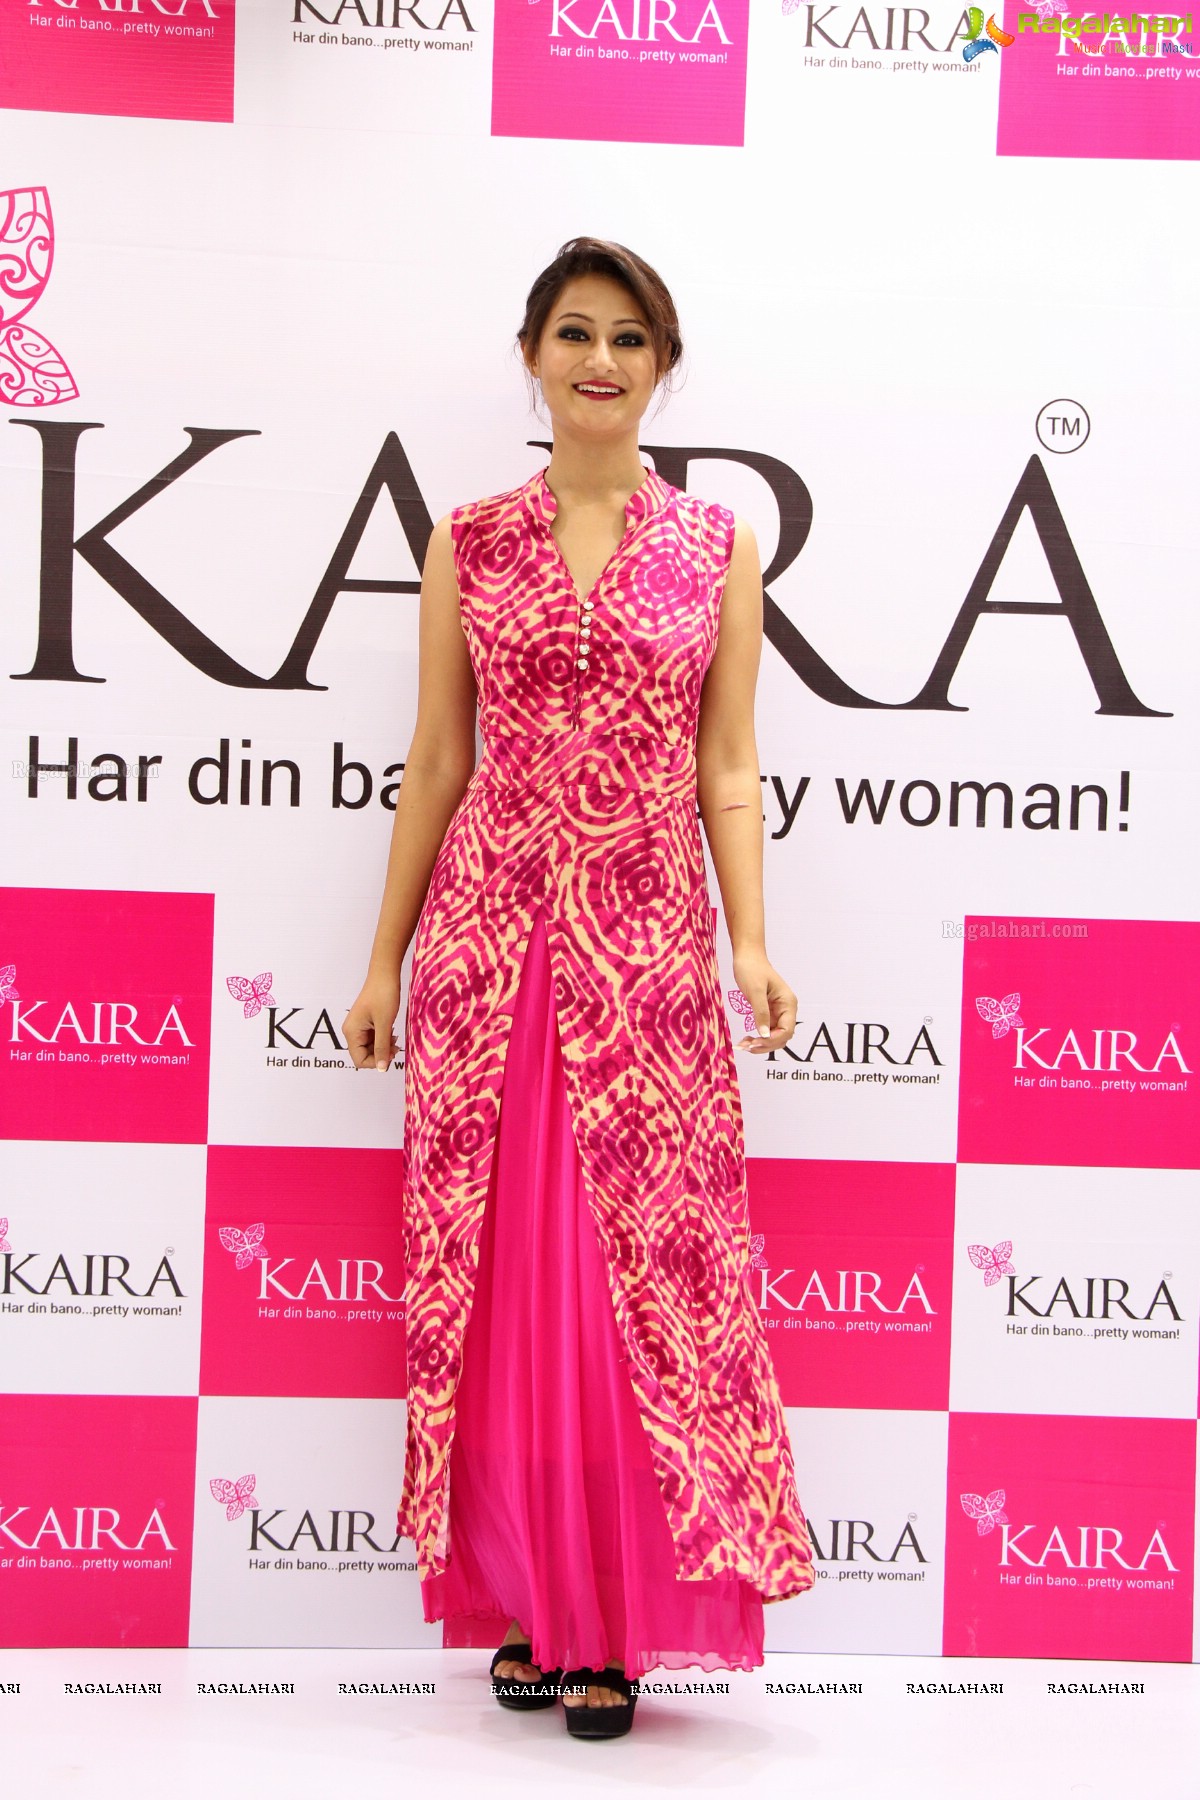 Kaira Fashion Show and Launch of All India Festive Season Special Collection